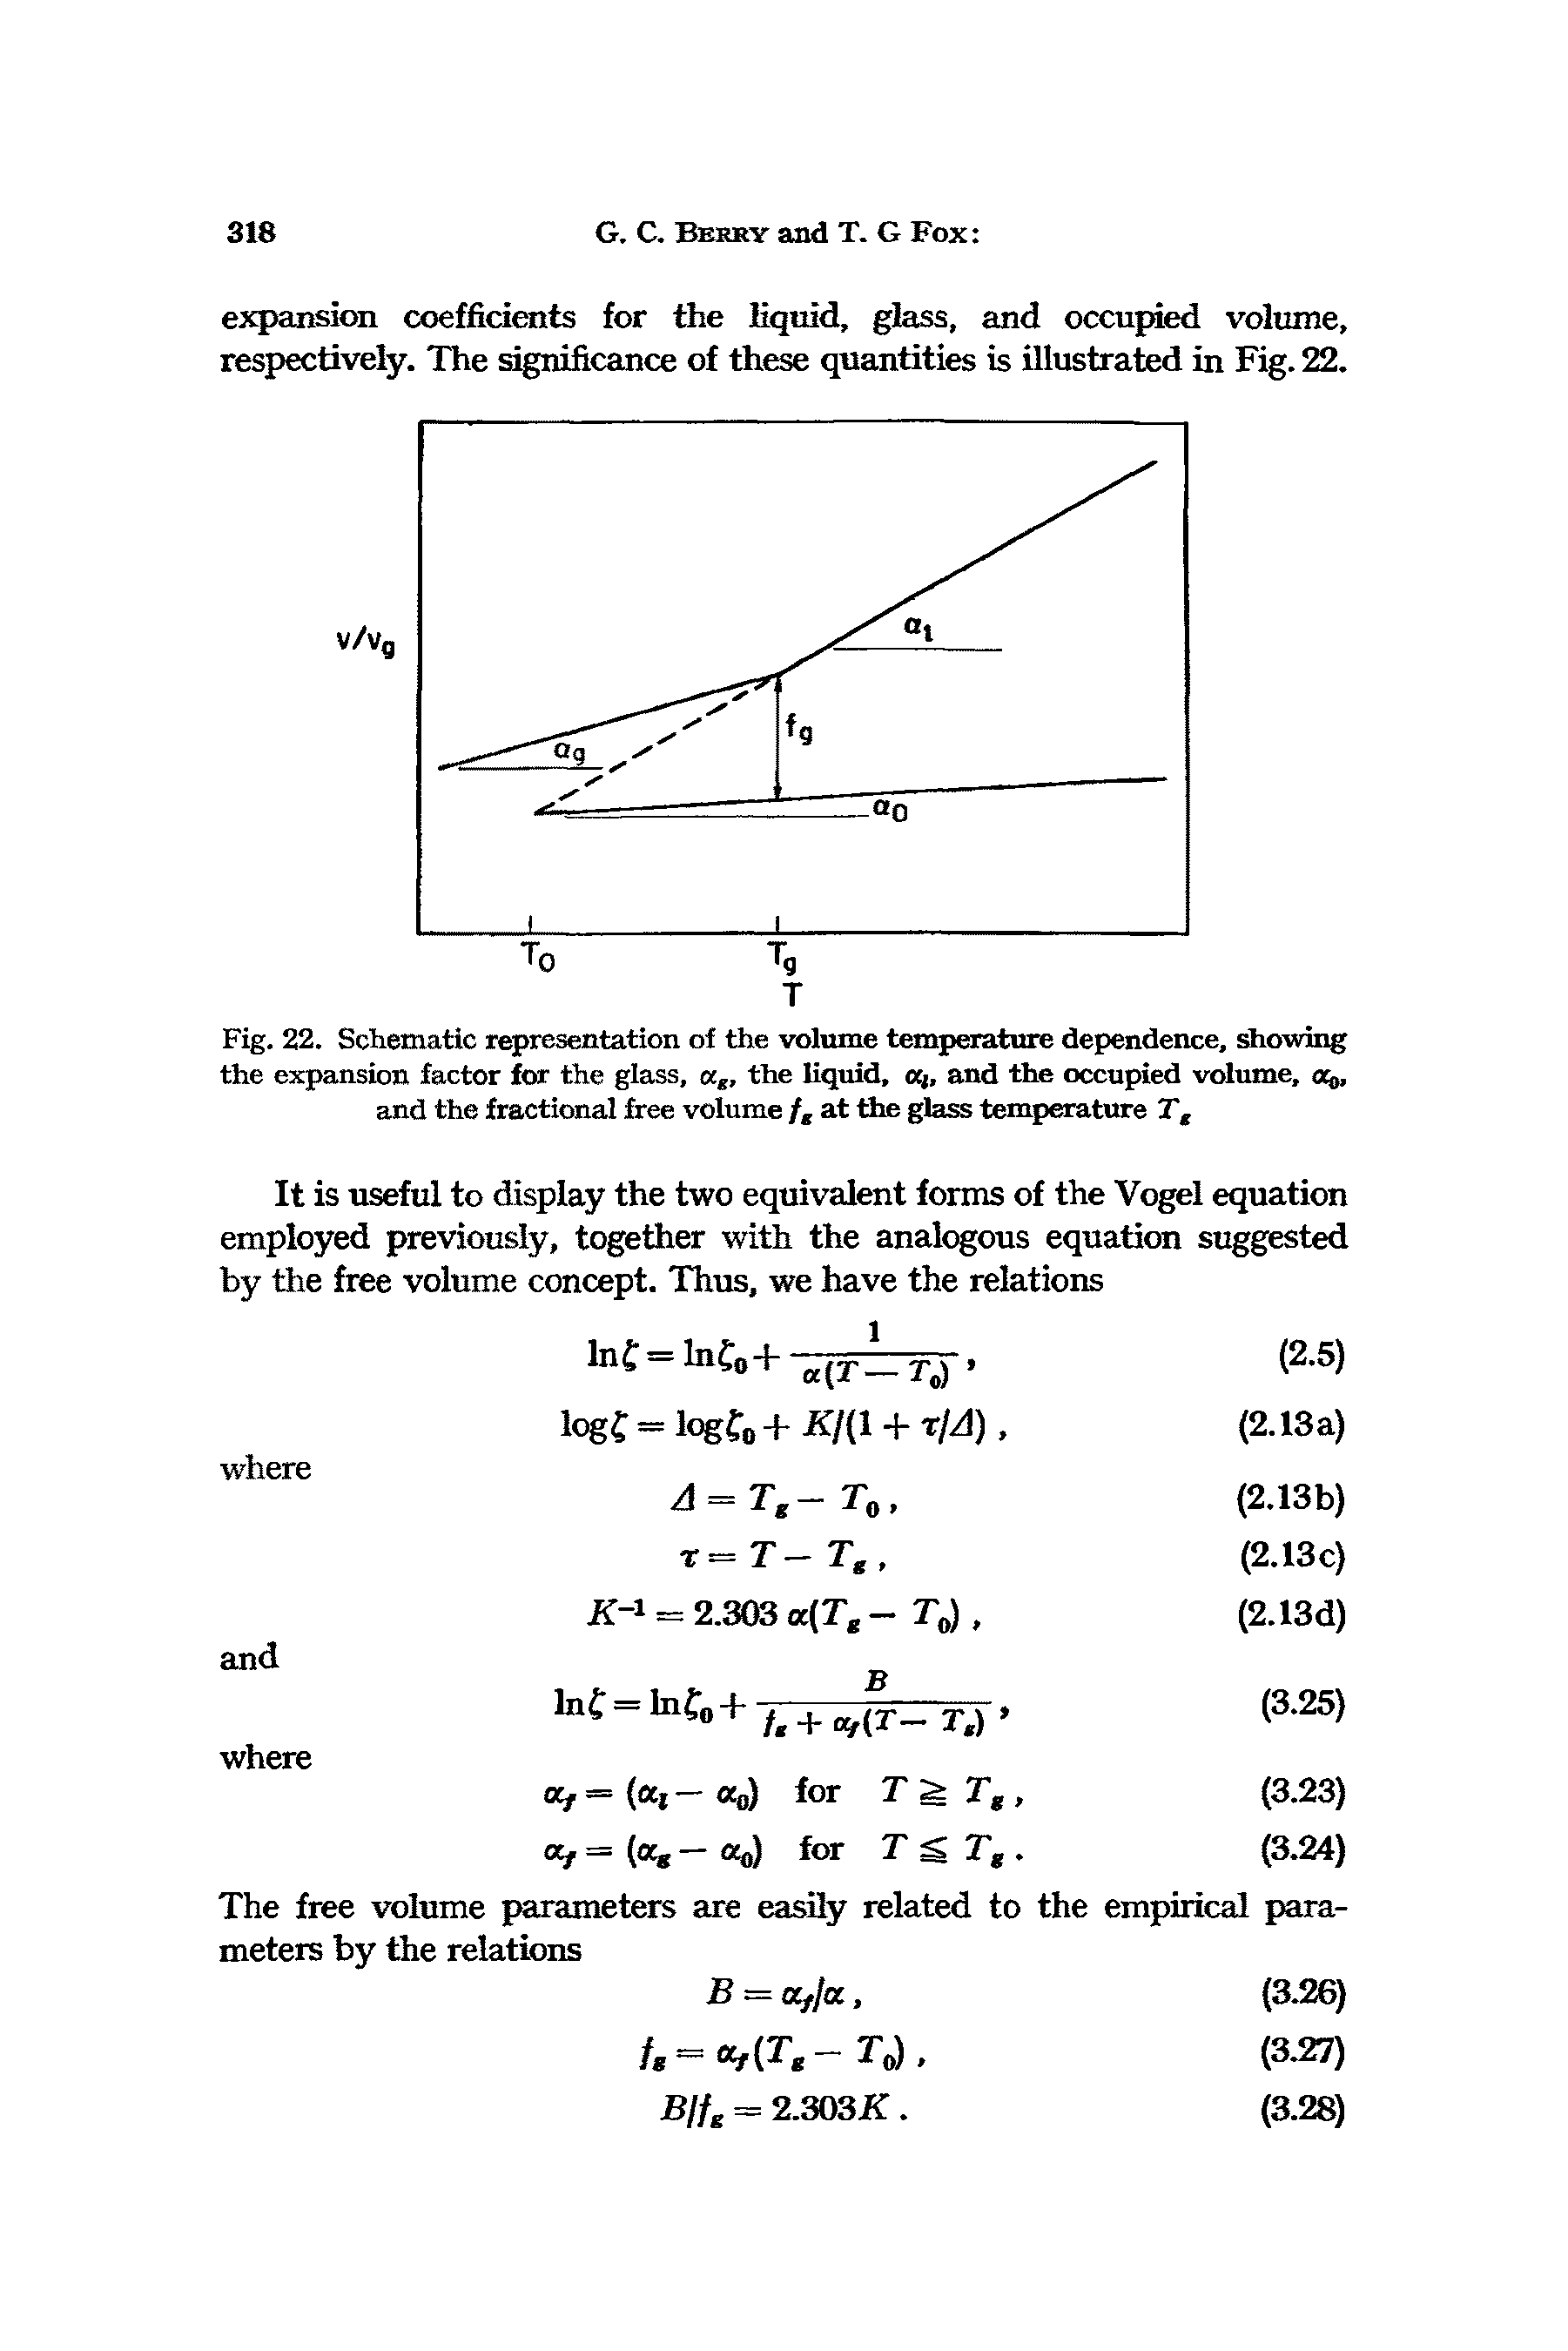 Fig. 22. Schematic representation of the volume temperature dependence, lowing the expansion factor for the glass, a, the liquid, oci, and the occupied volume, o%, and the fractional free volume / at the glass temperature T ...